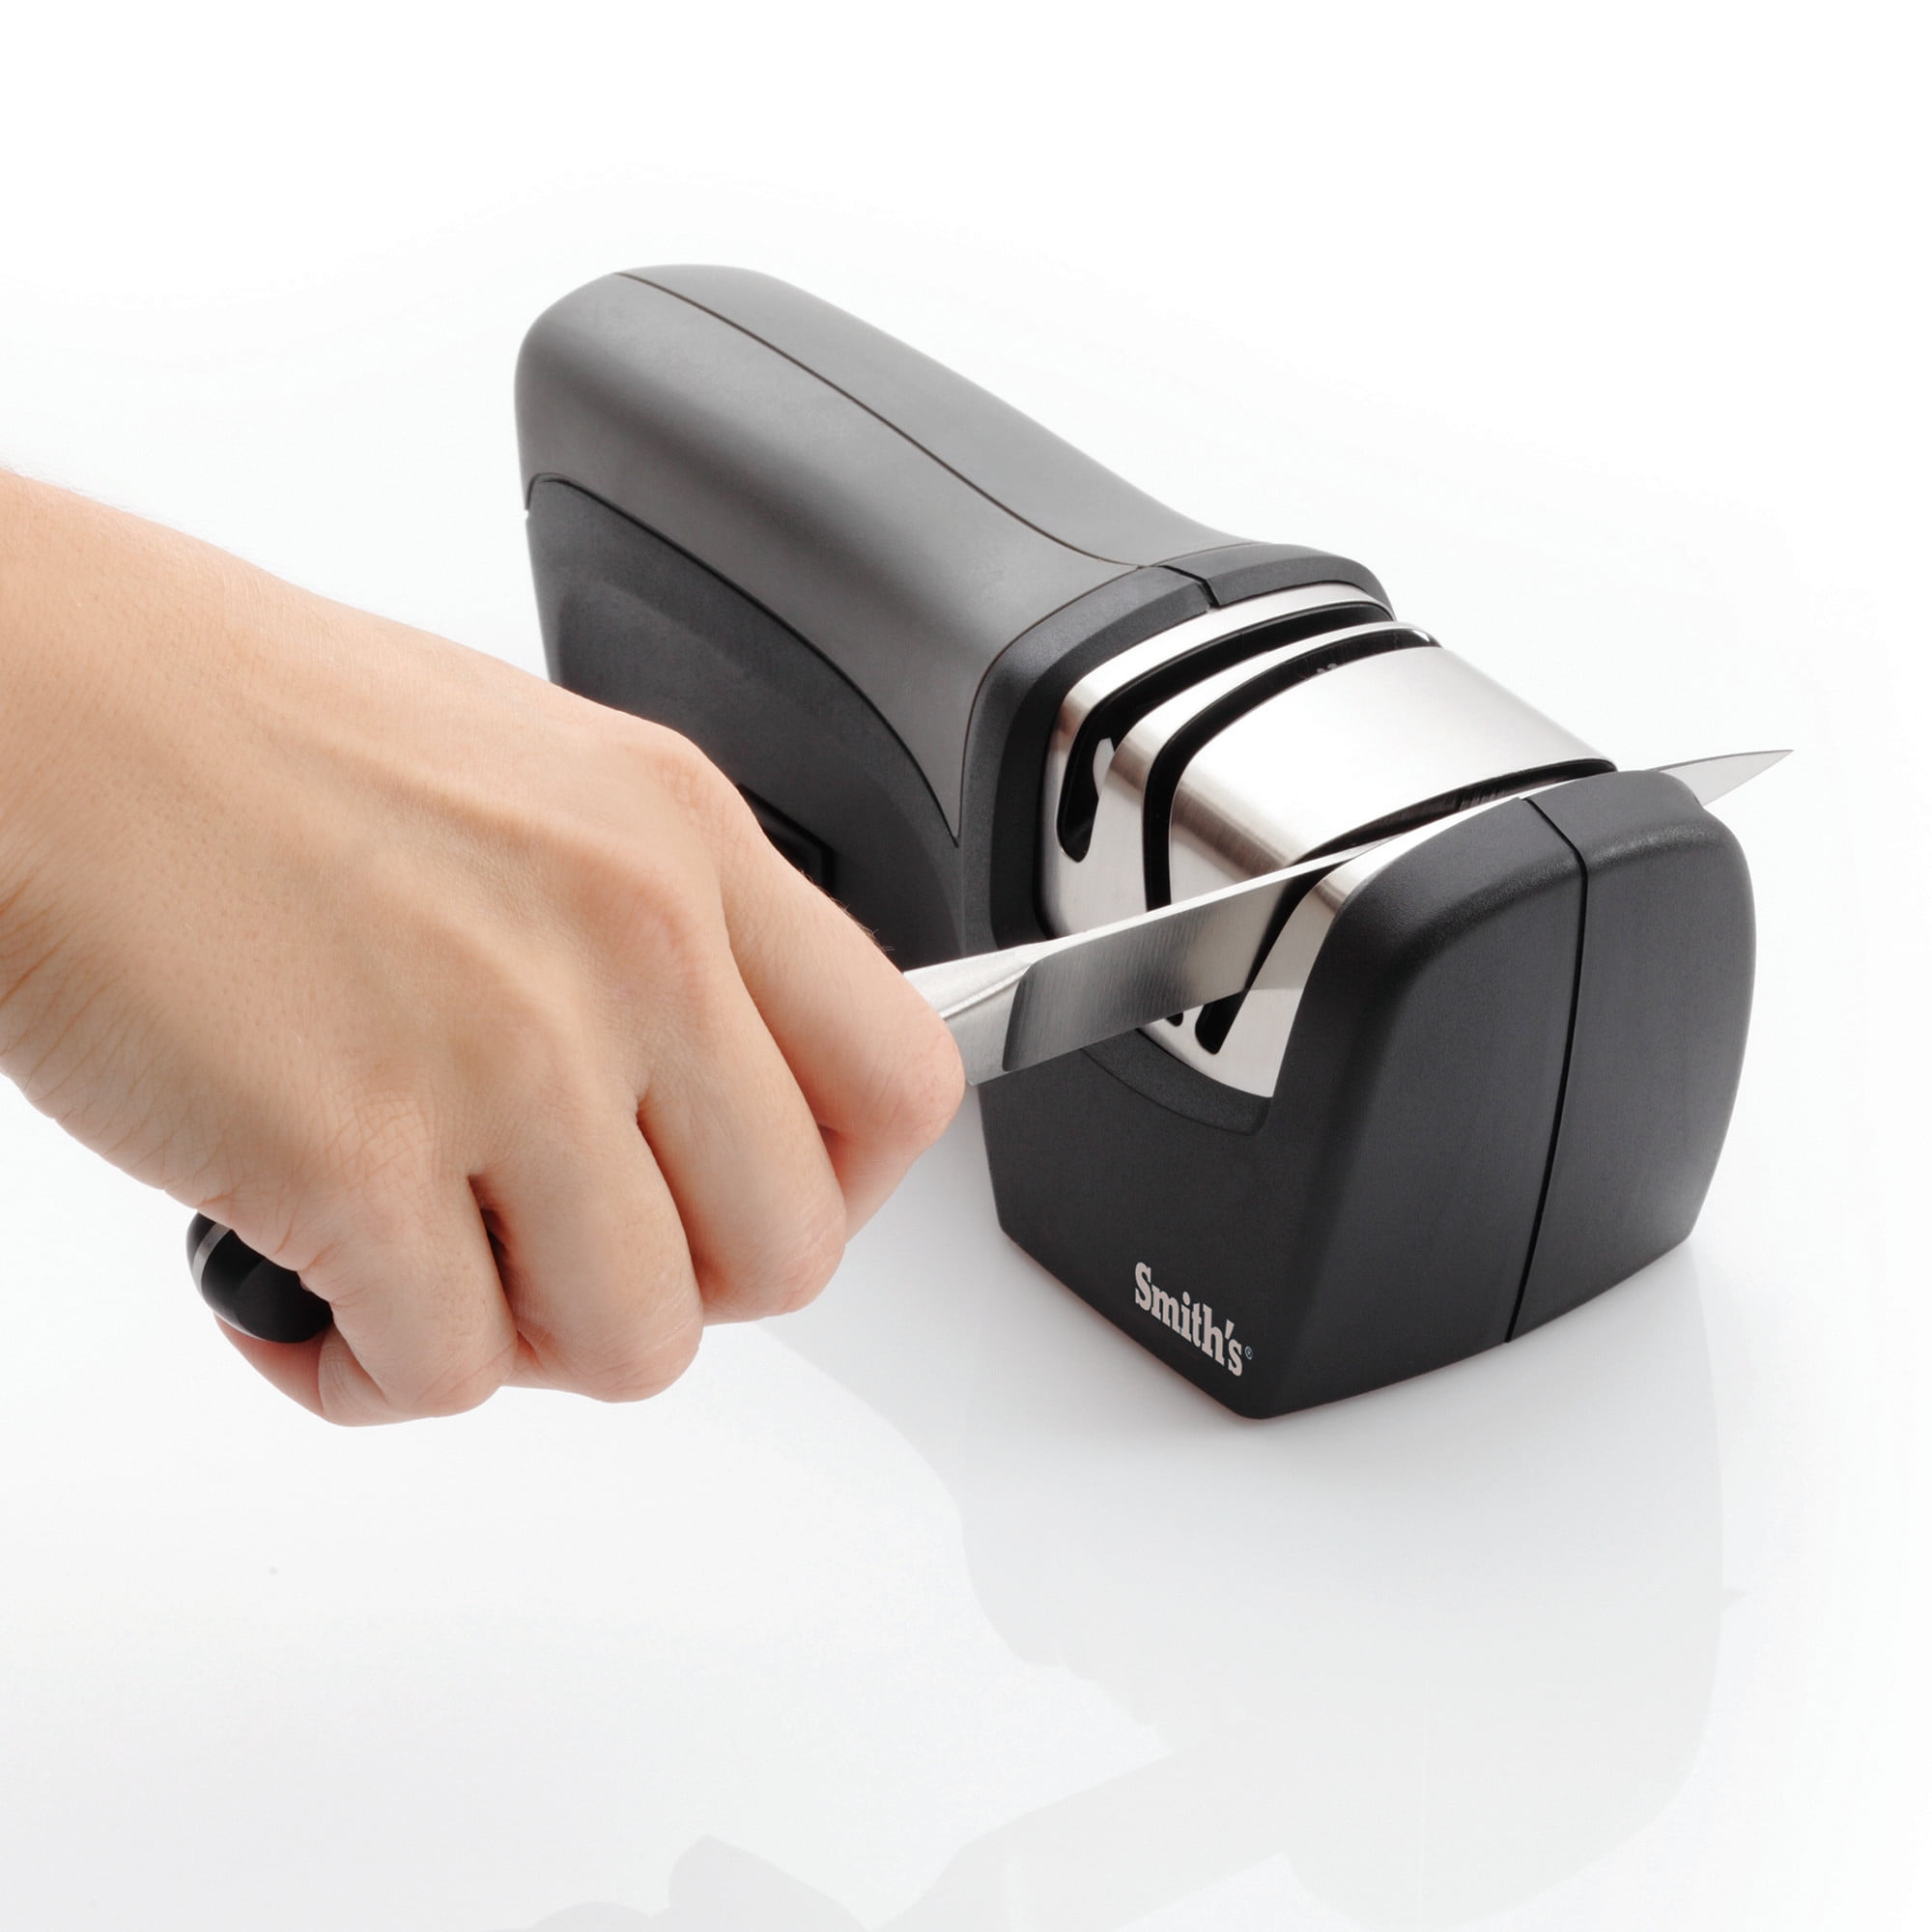  Smith's 50029 Compact Electric Knife Sharpener